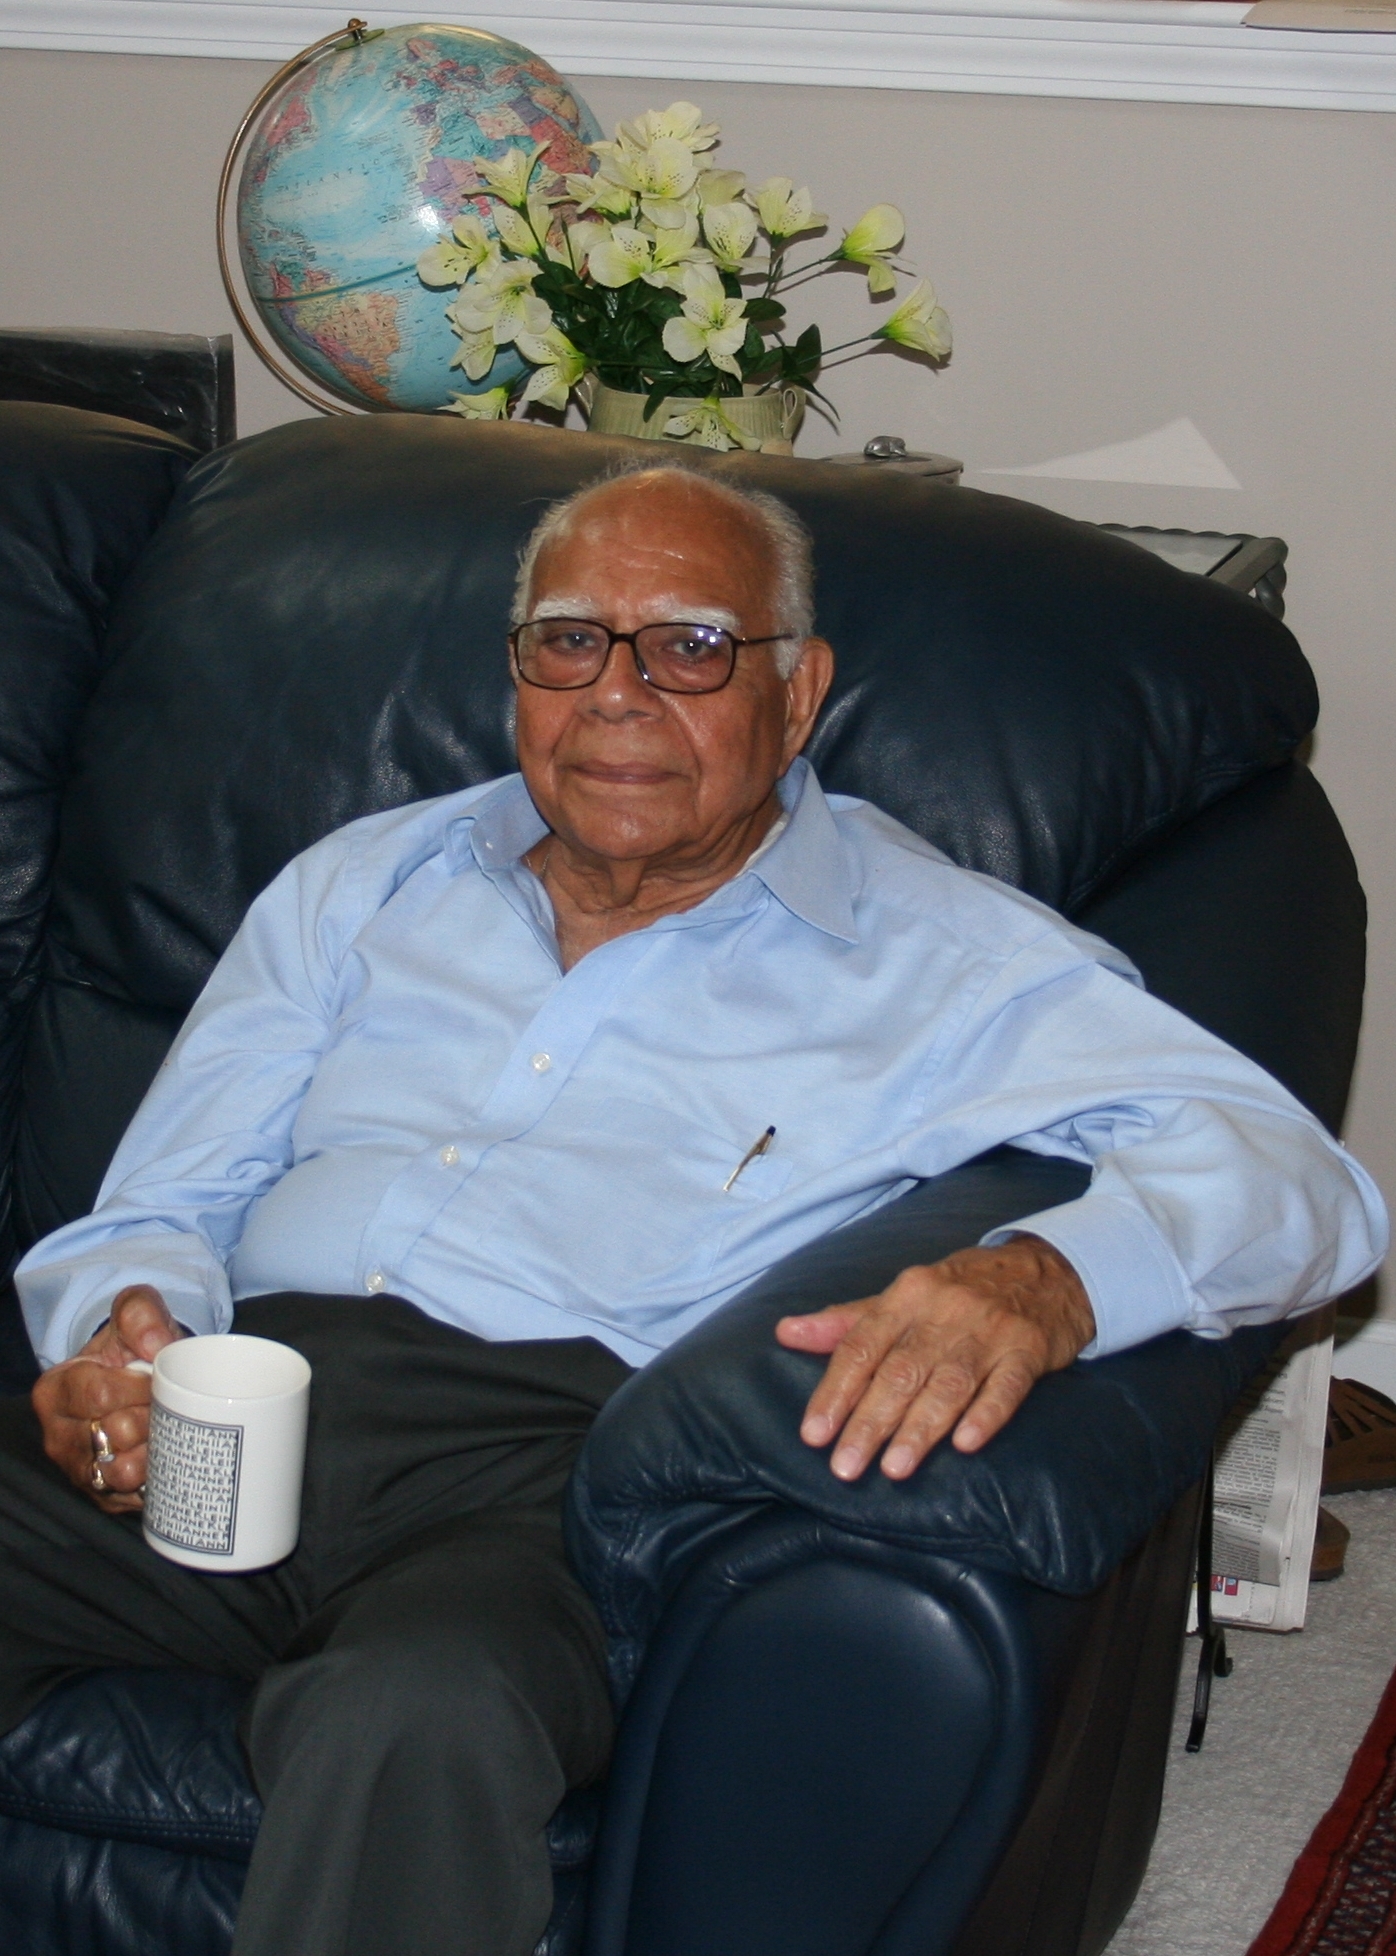 Ram Jethmalani, Rajya Sabha MP and one of the country's top lawyers, would have turned 96 years old on September 14